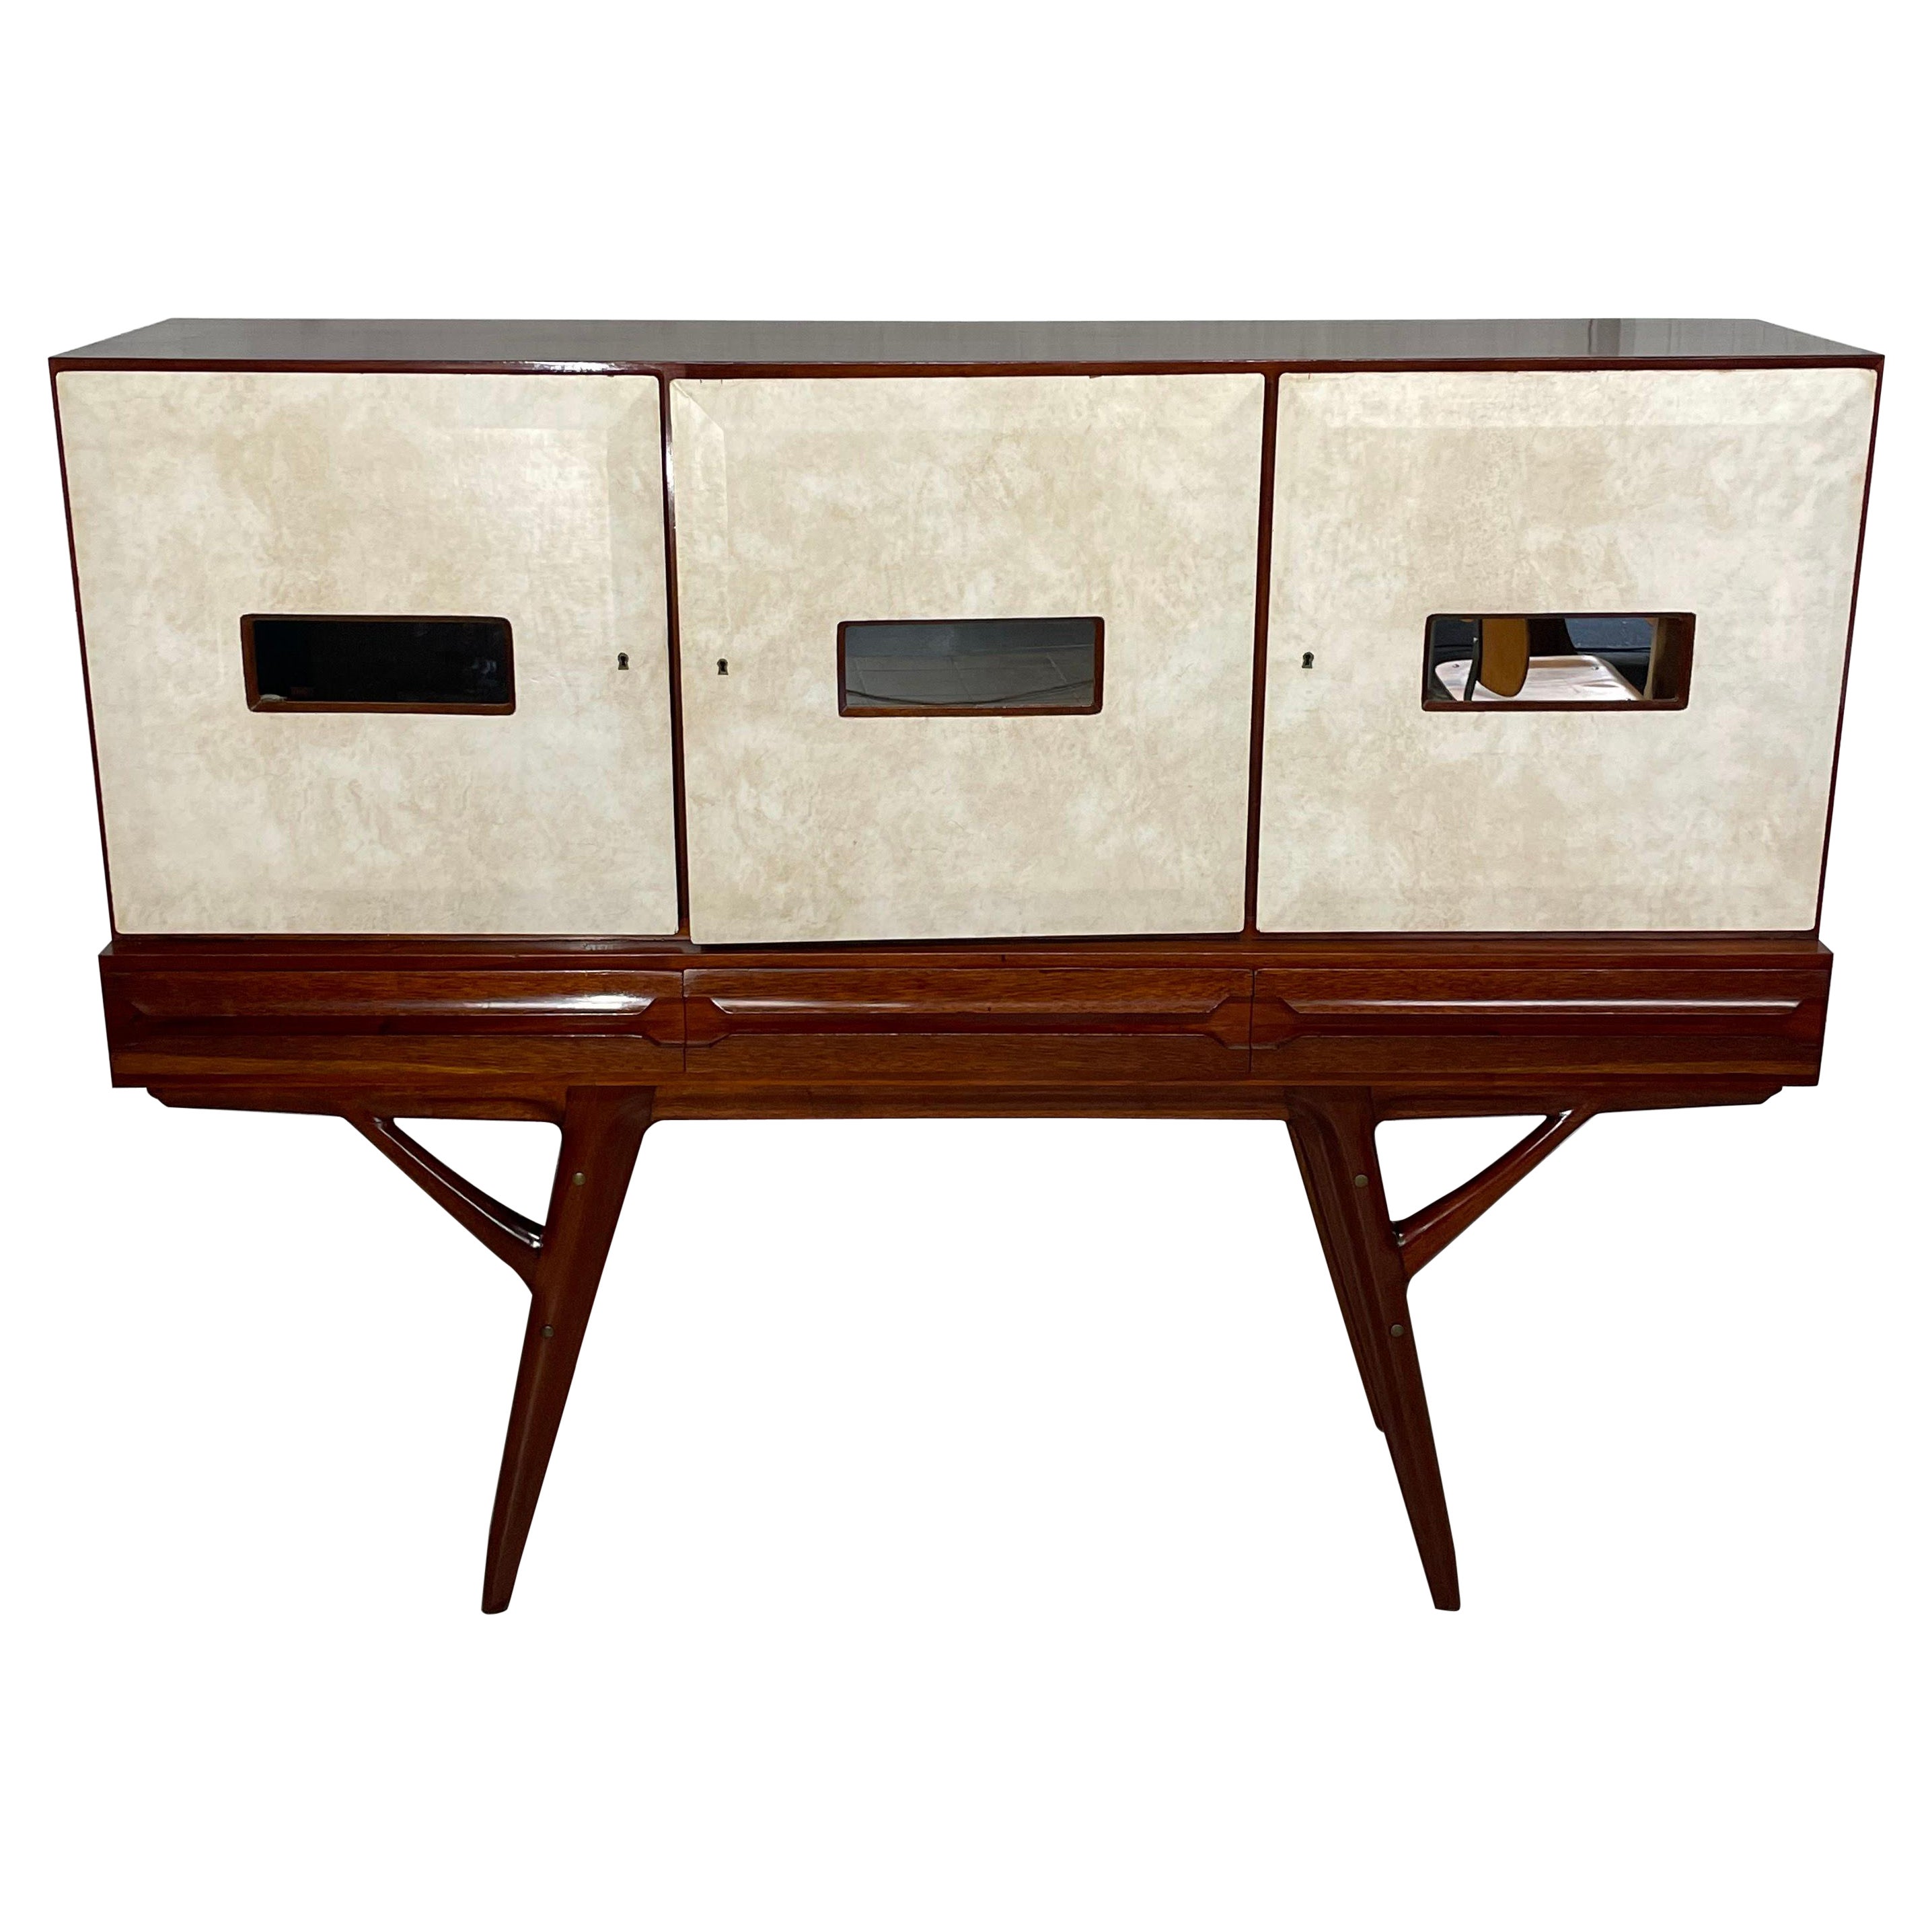 1950s sideboard manufactured by Palazzi dell'Arte Cantù, Italy